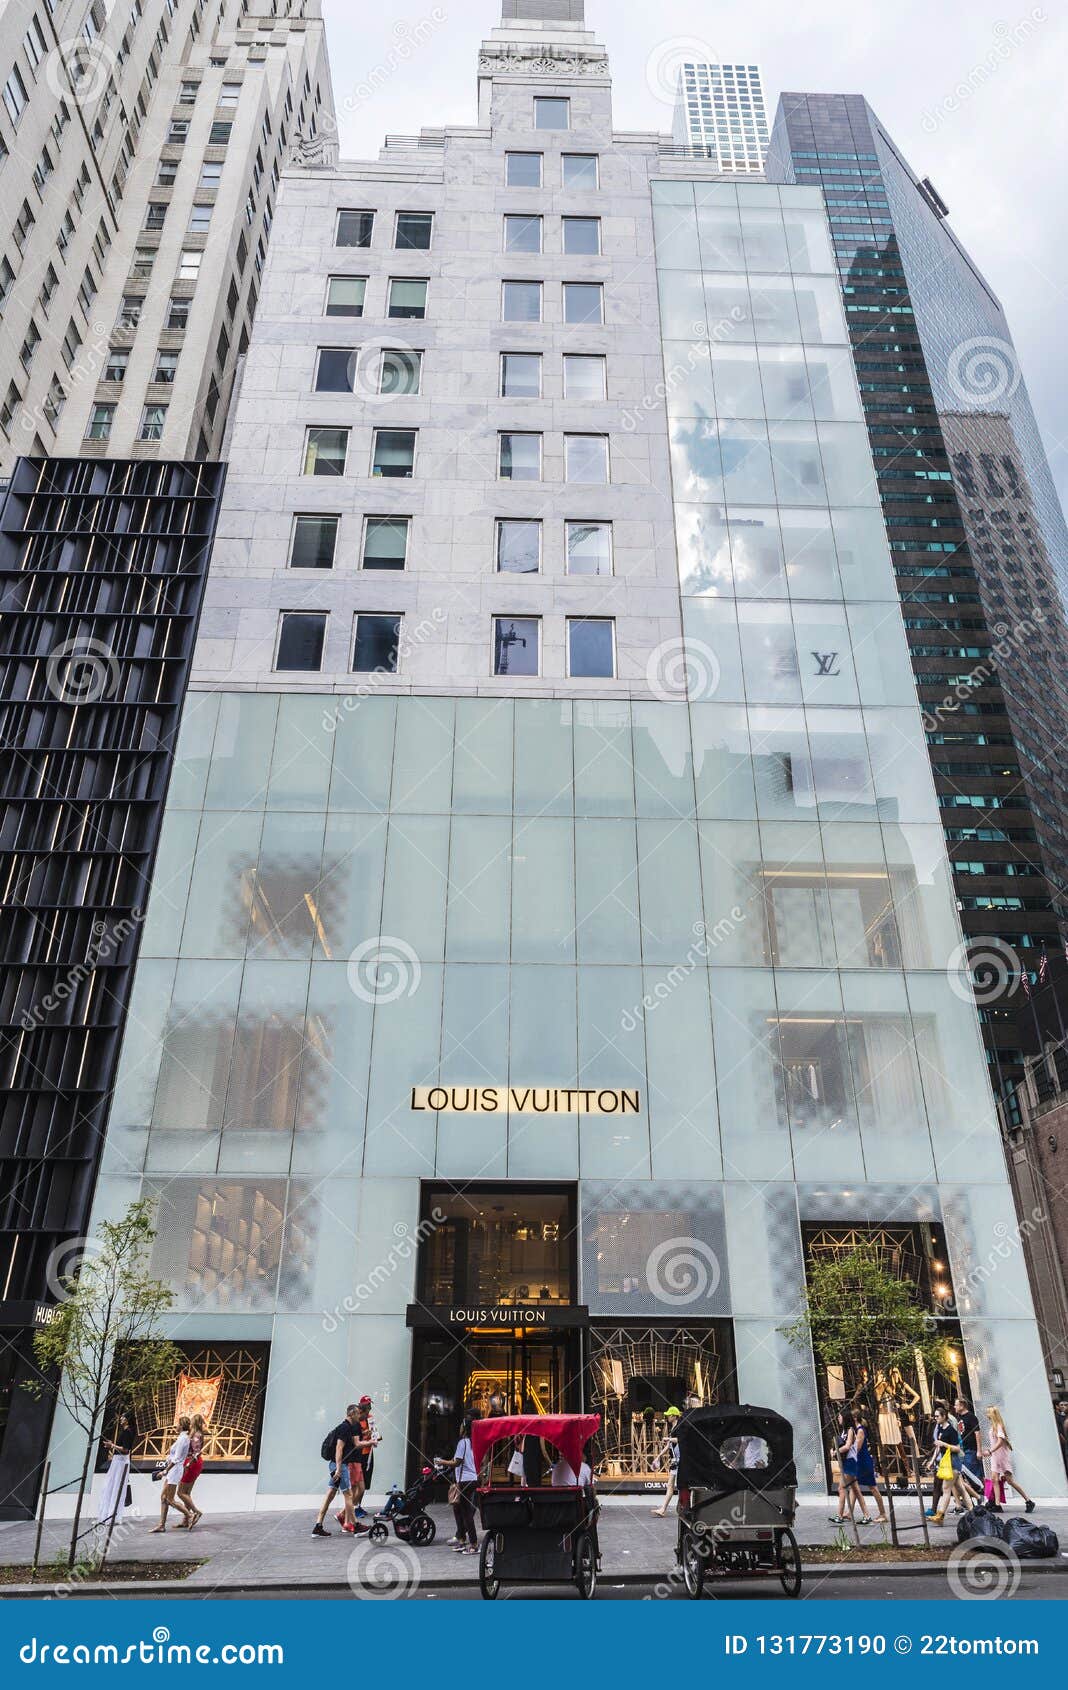 Louis Vuitton, Luxury Clothing Store, In Fifth Avenue 5th Avenue With People Around In Editorial ...